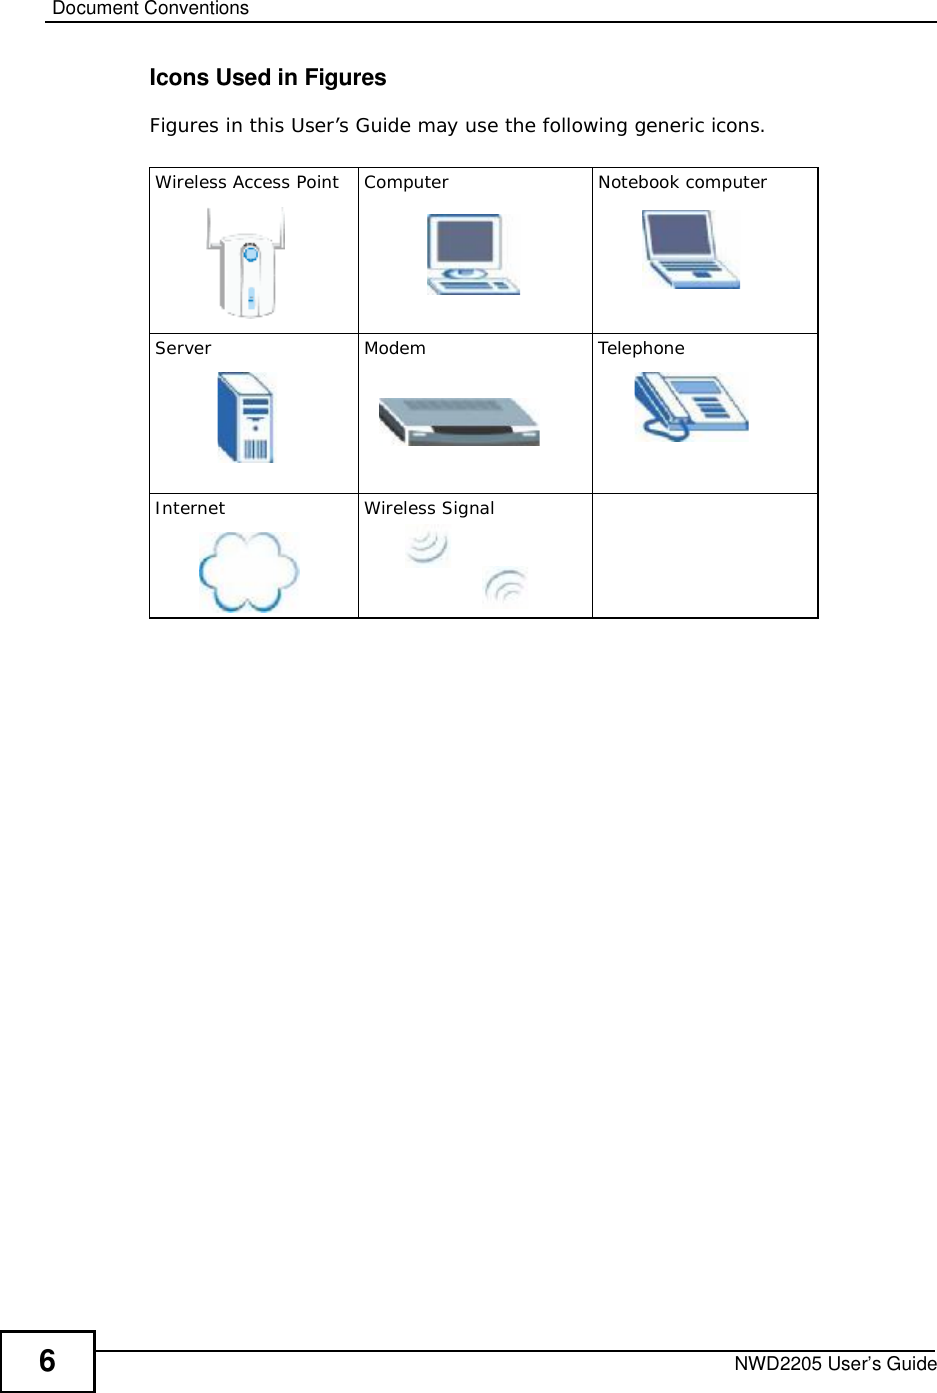 Document ConventionsNWD2205 User’s Guide6Icons Used in FiguresFigures in this User’s Guide may use the following generic icons. Wireless Access Point Computer Notebook computerServer Modem TelephoneInternet Wireless Signal